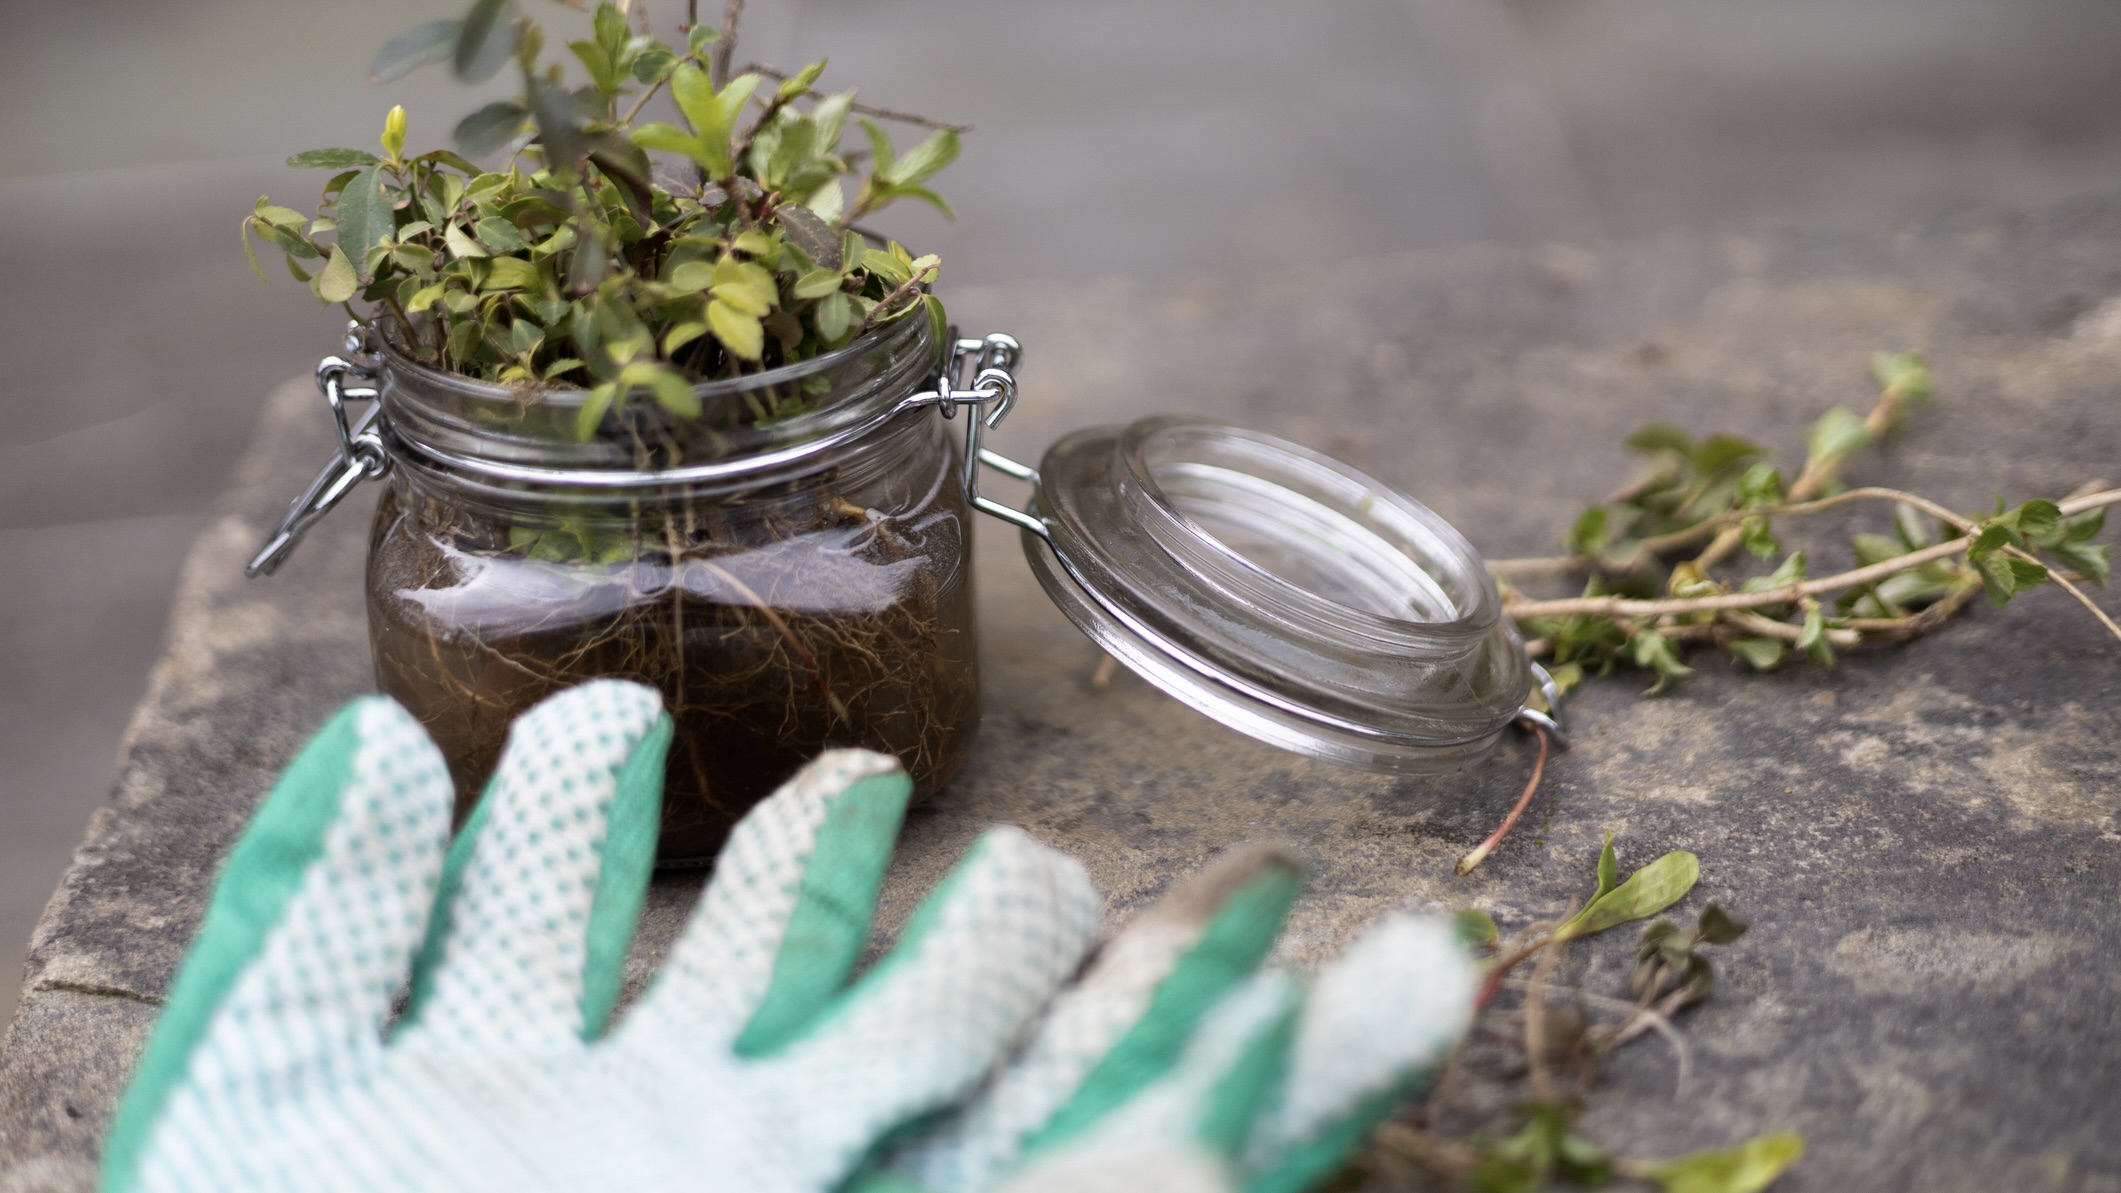 Glass jar of volunteer plants from garden on slate surface with gardening gloves in foreground